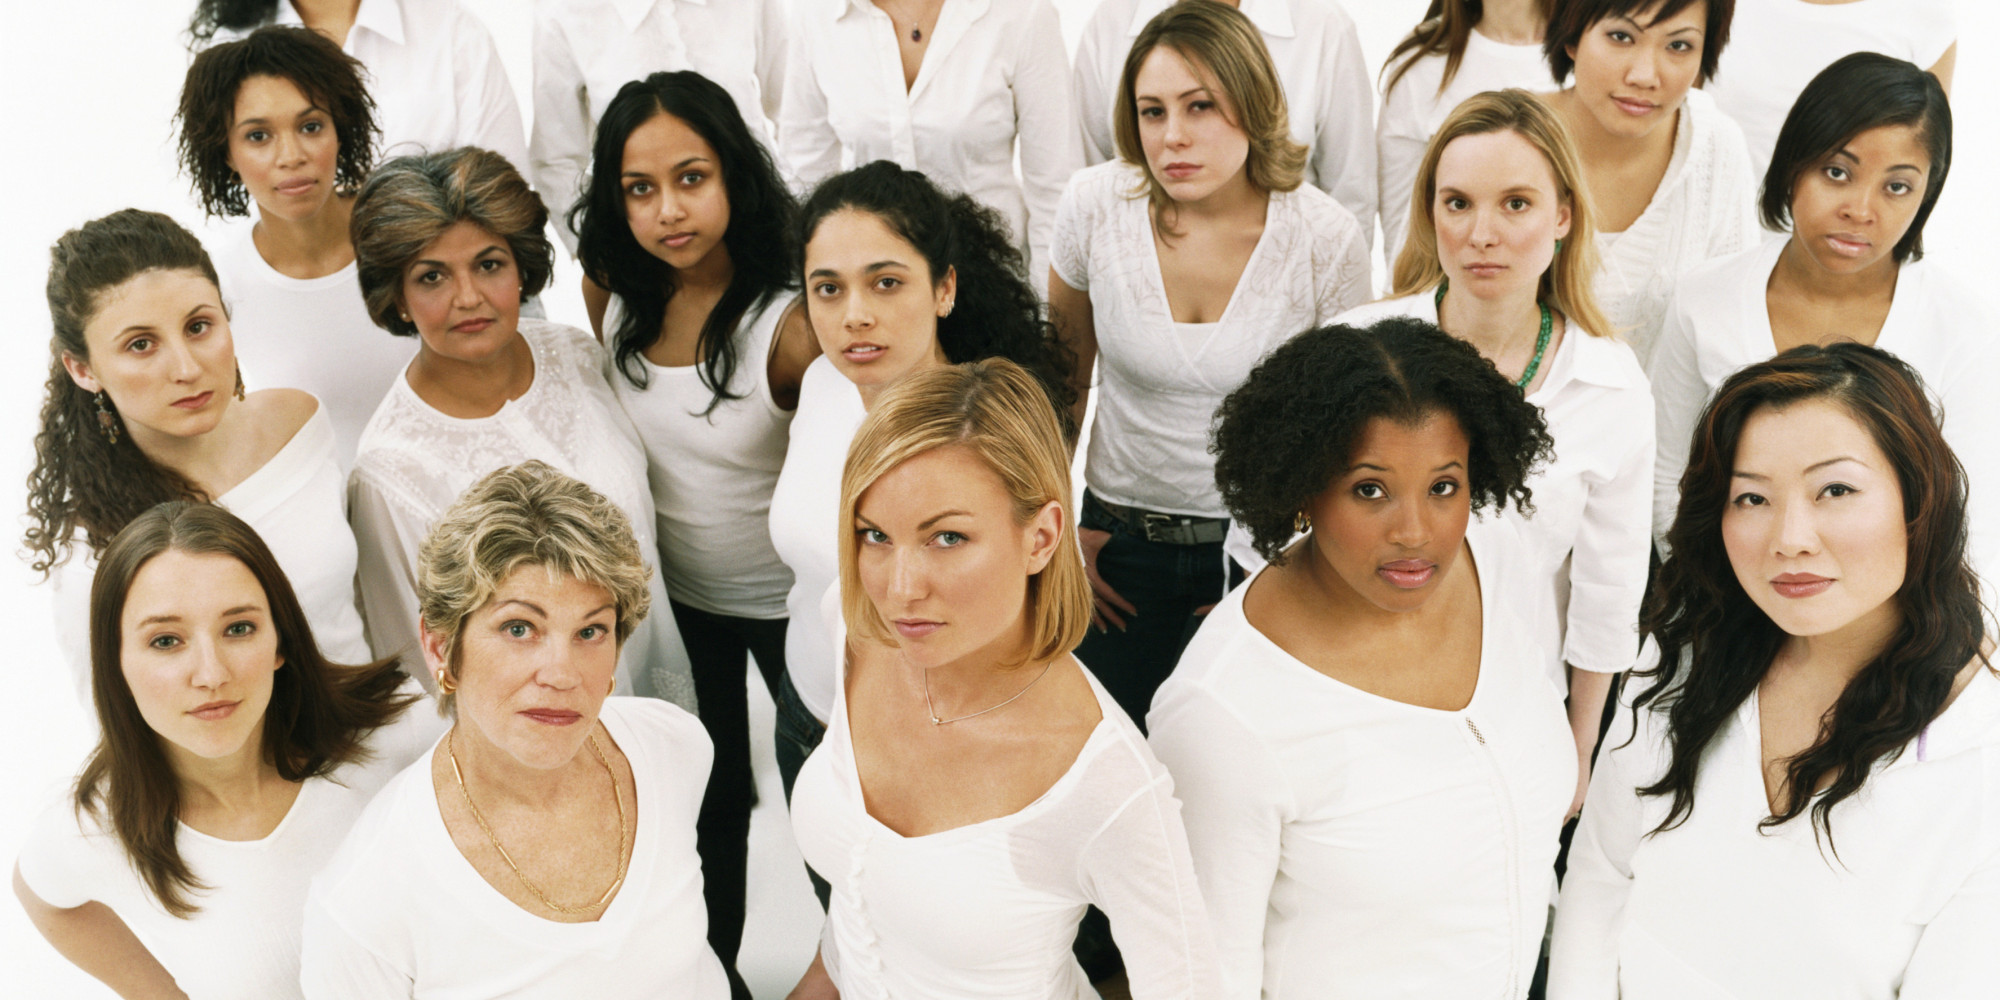 Studio Portrait of a Mixed Age, Multiethnic, Large Group of Displeased Women Wearing White Tops